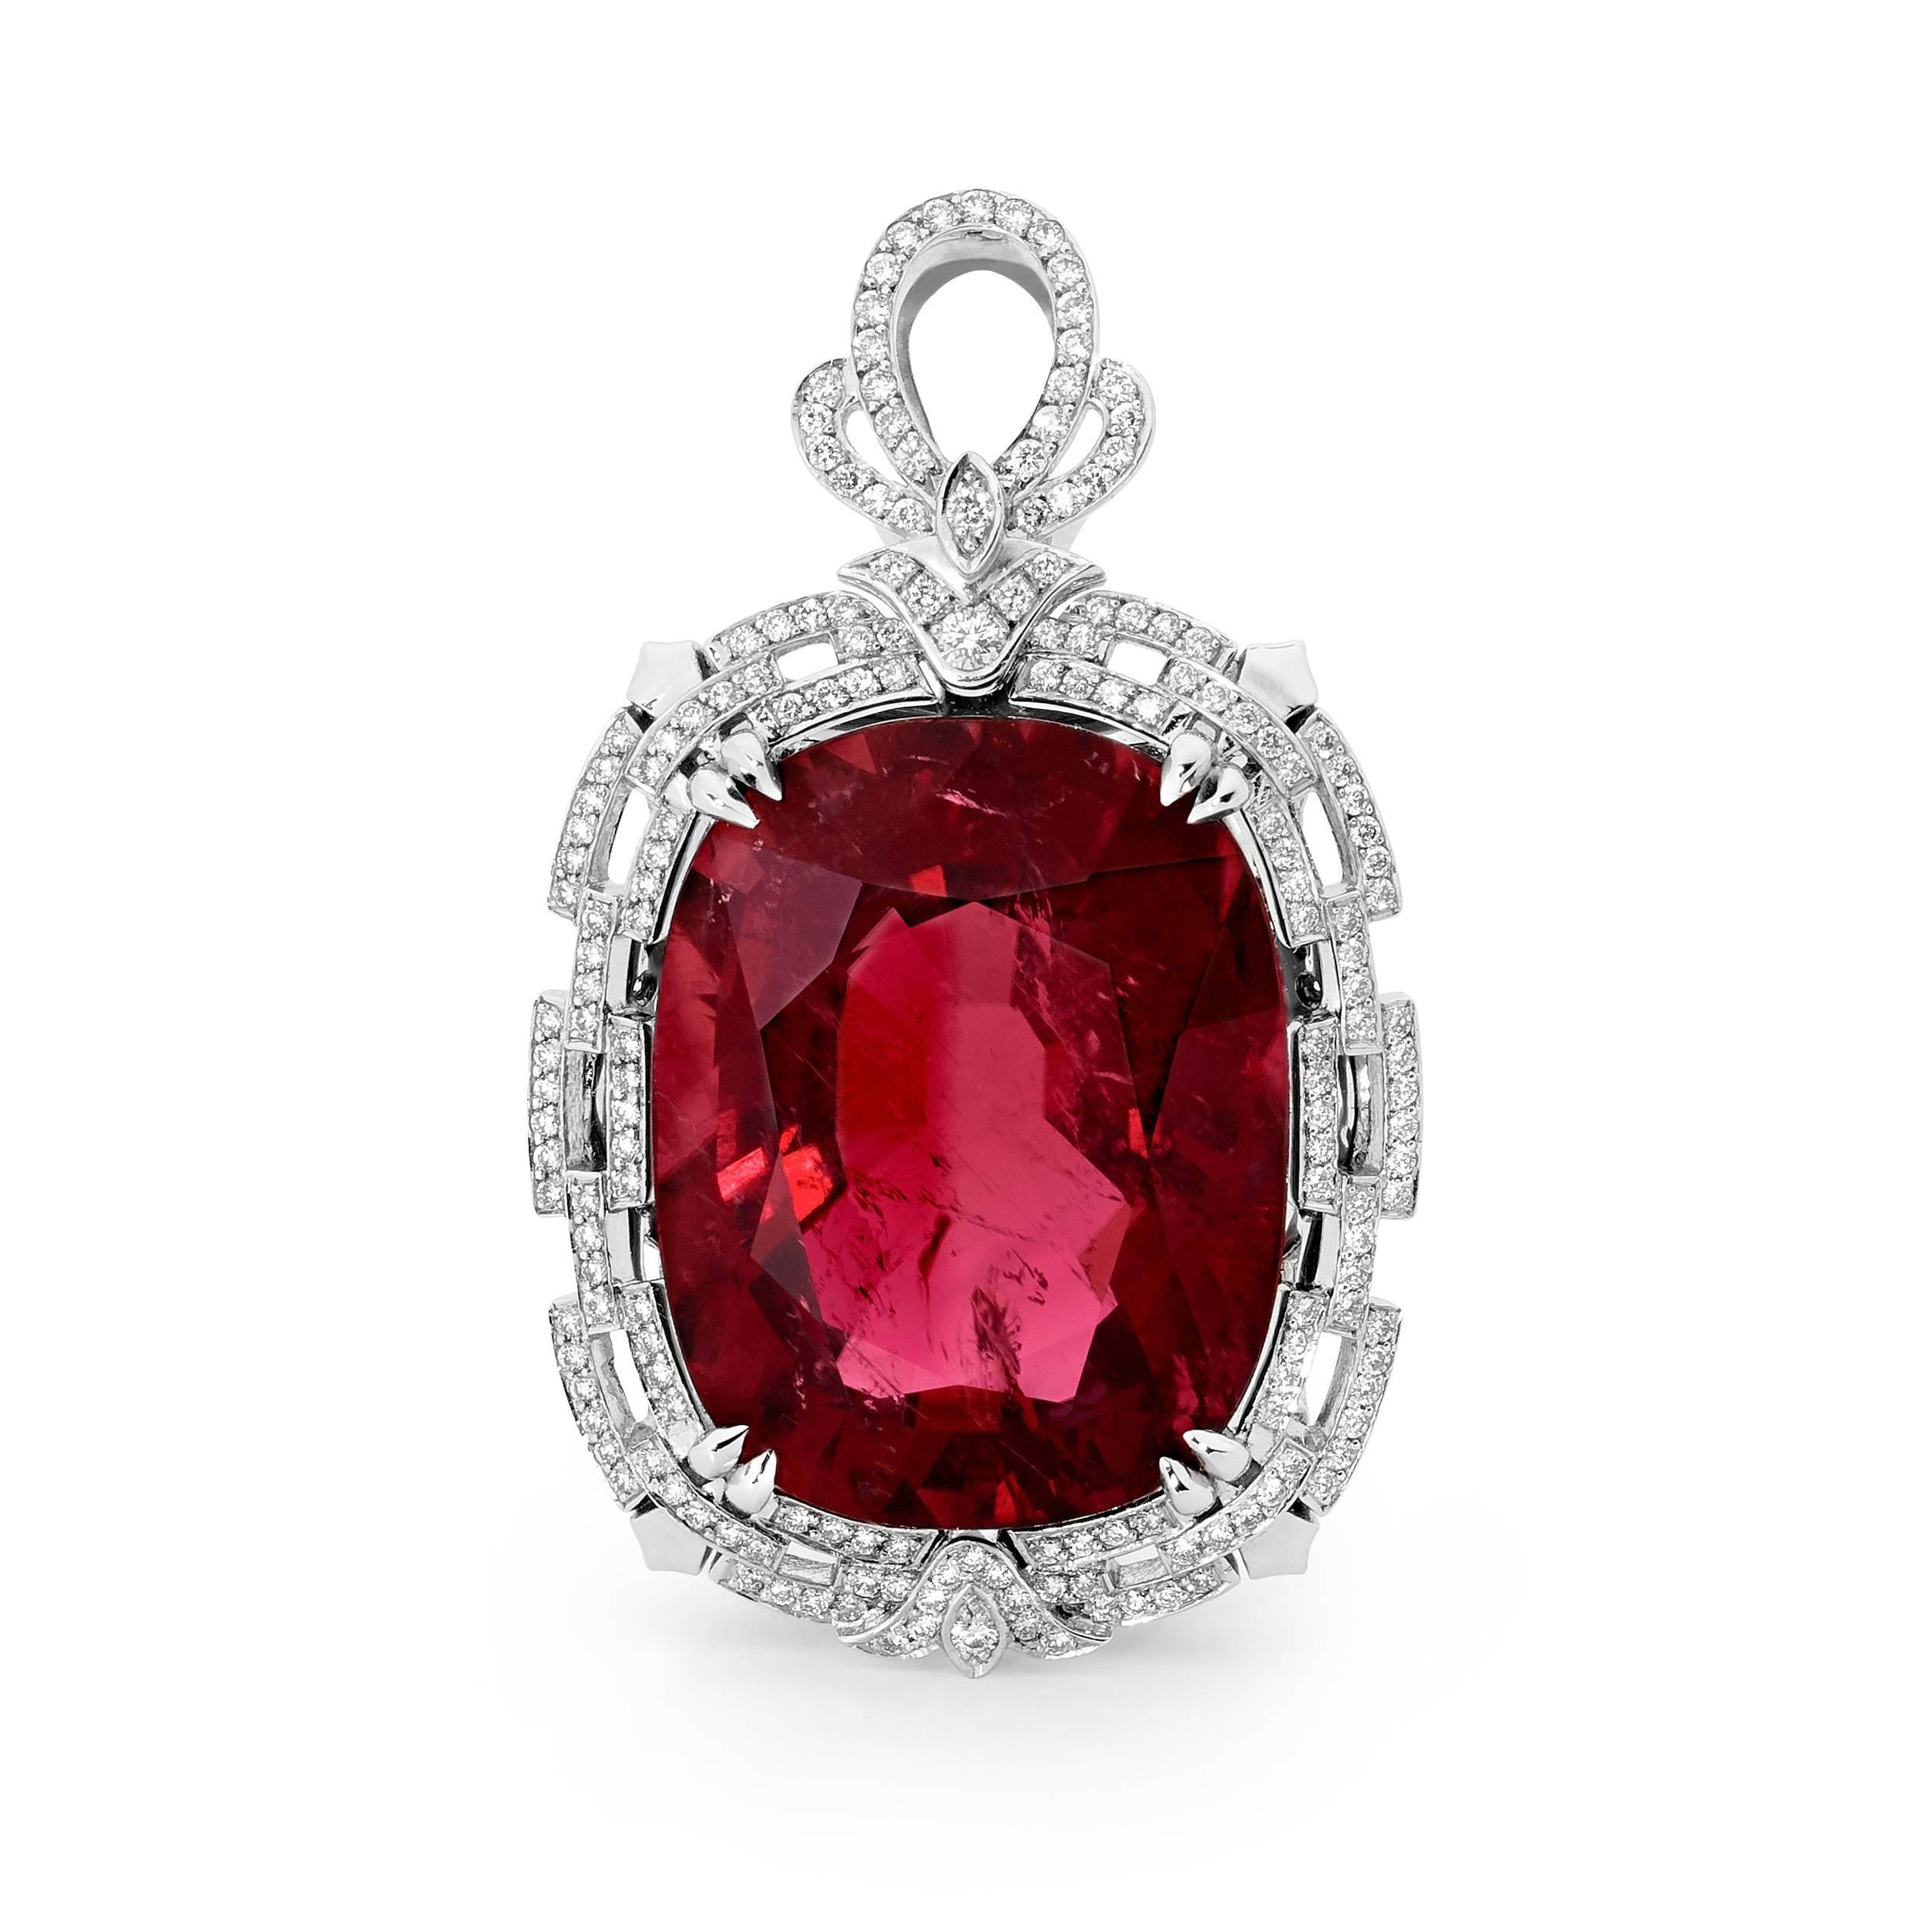 Our Joyau Rouge features a stunning 64.53ct Rubellite Tourmaline at its heart, surrounded with over 1.64cts of bright white diamonds with a VS/SI clarity in an 18ct white gold Art Deco inspired setting. The pendant is suspended on a three layer